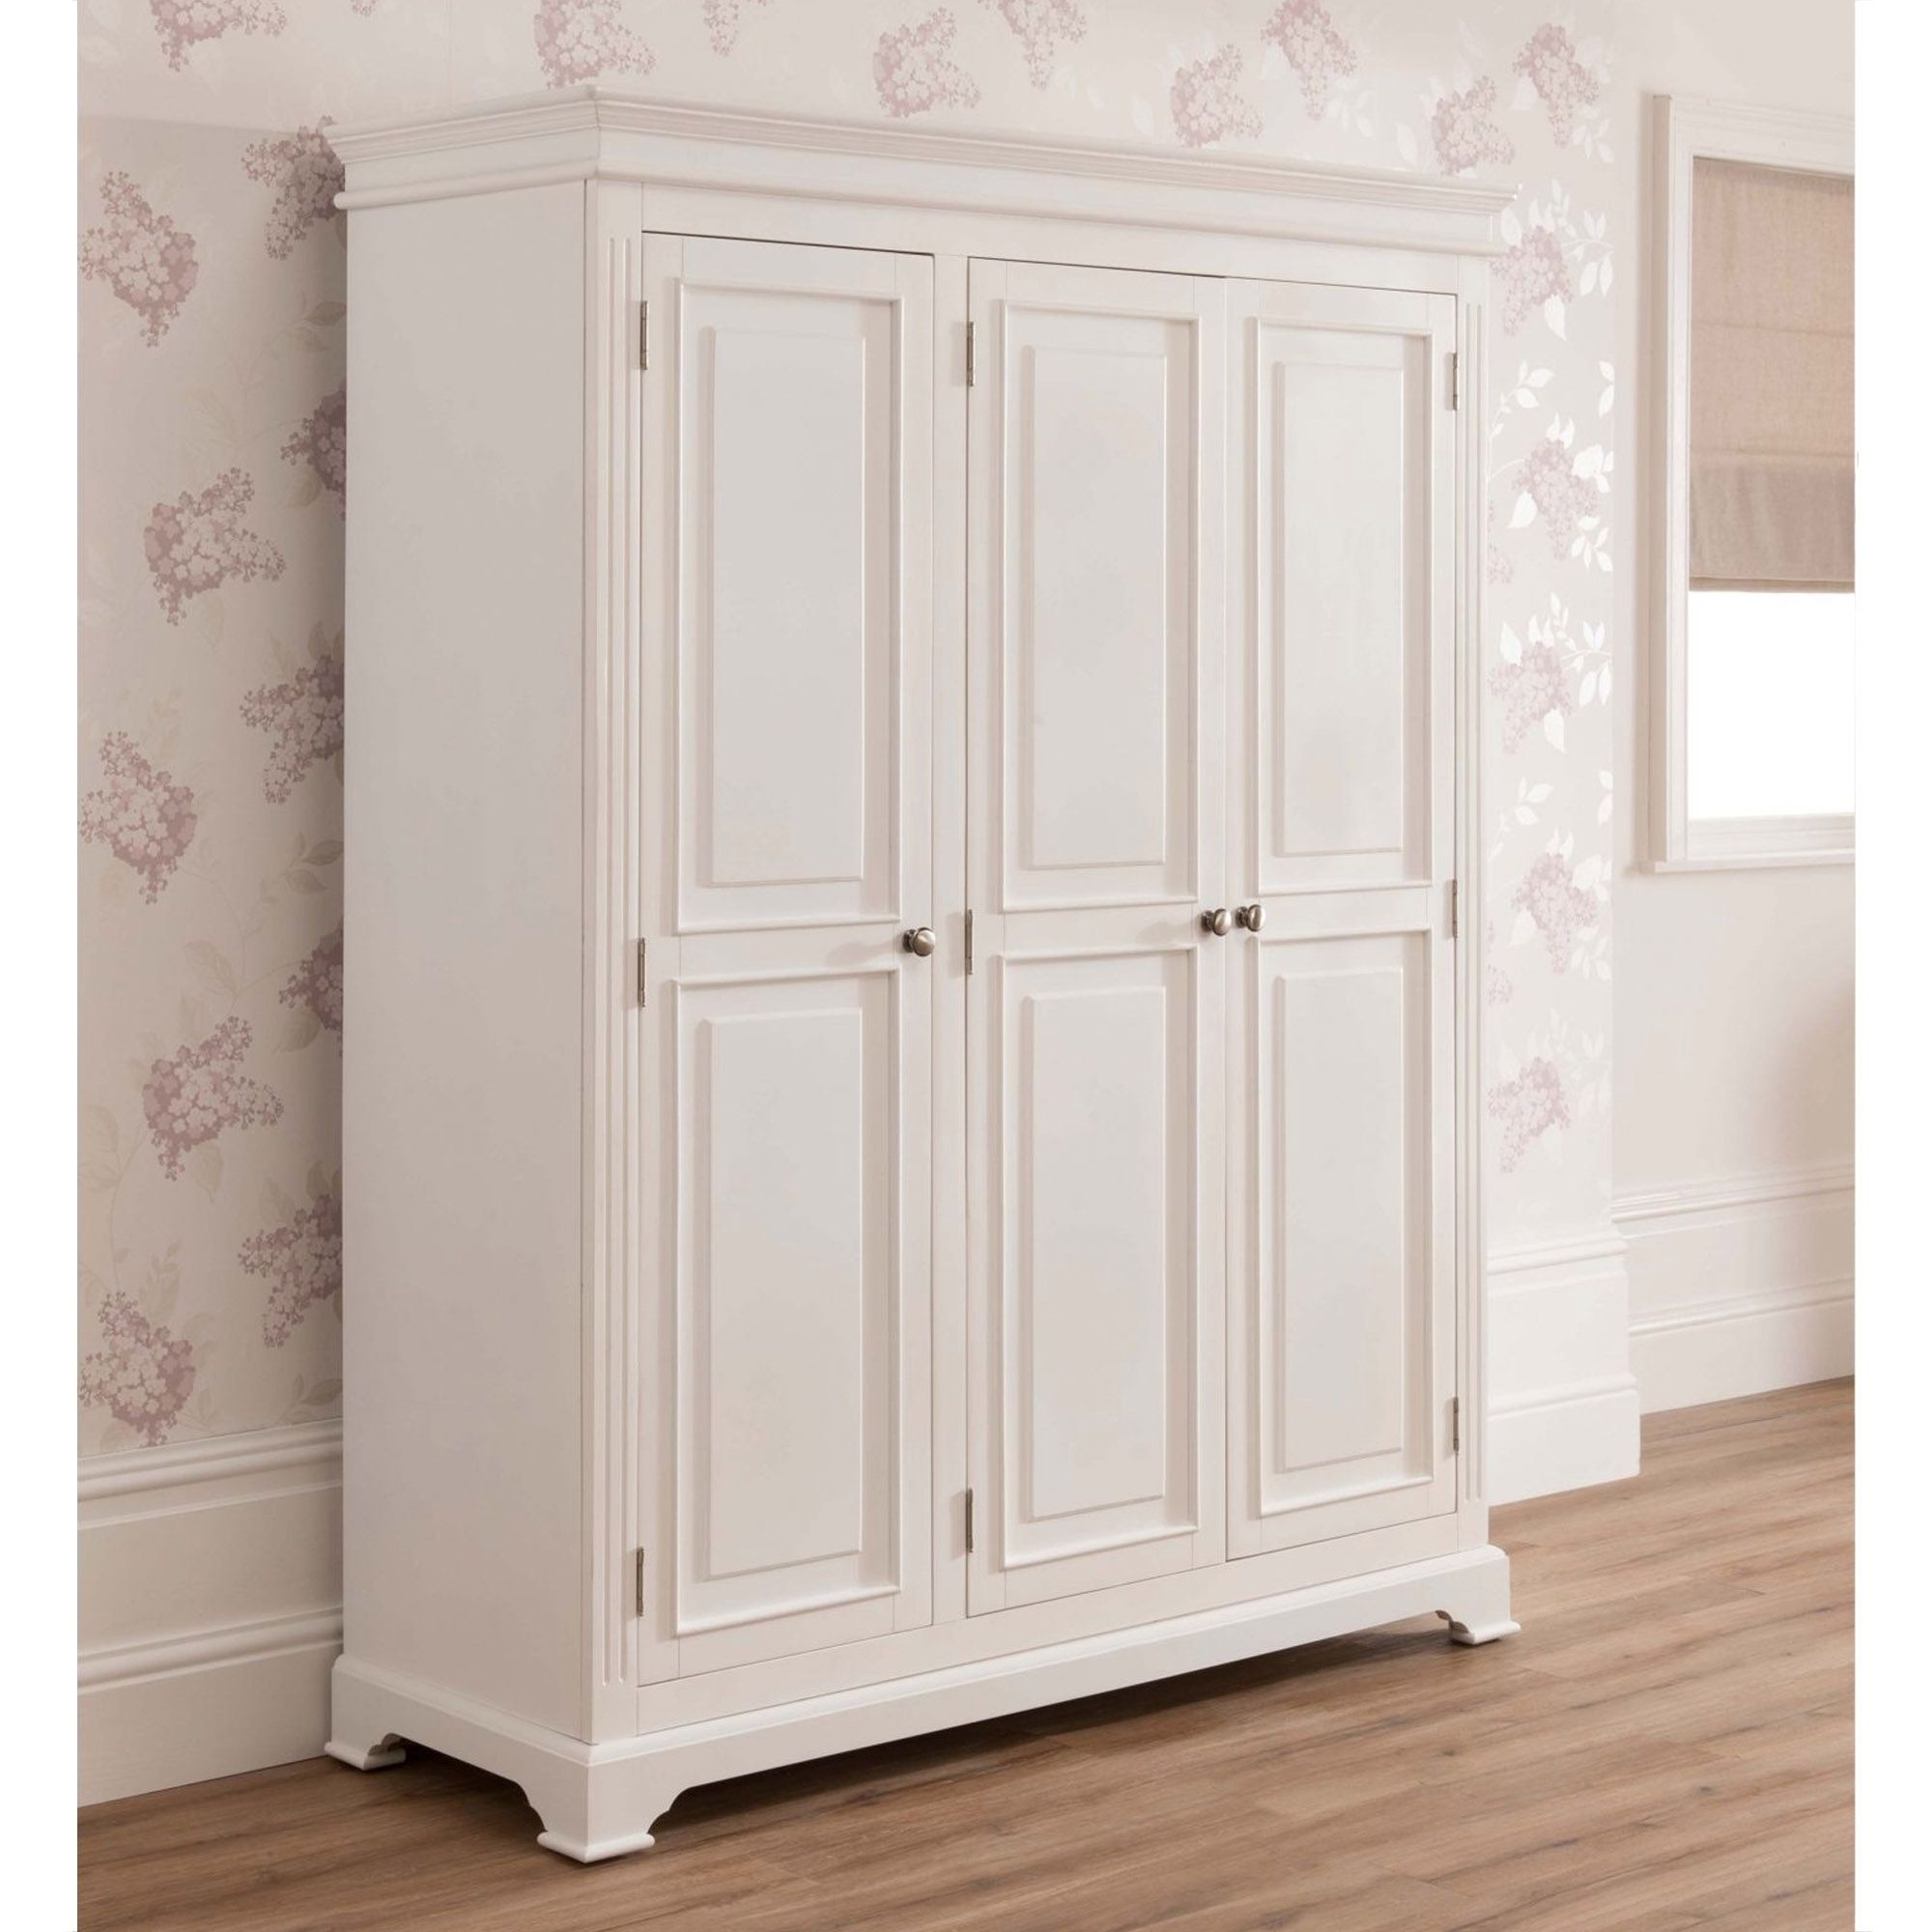 Sophia Shabby Chic Wardrobe Is A Fantastic Addition To Our Antique French  Furniture Within Shabby Chic Wardrobes (Gallery 1 of 20)